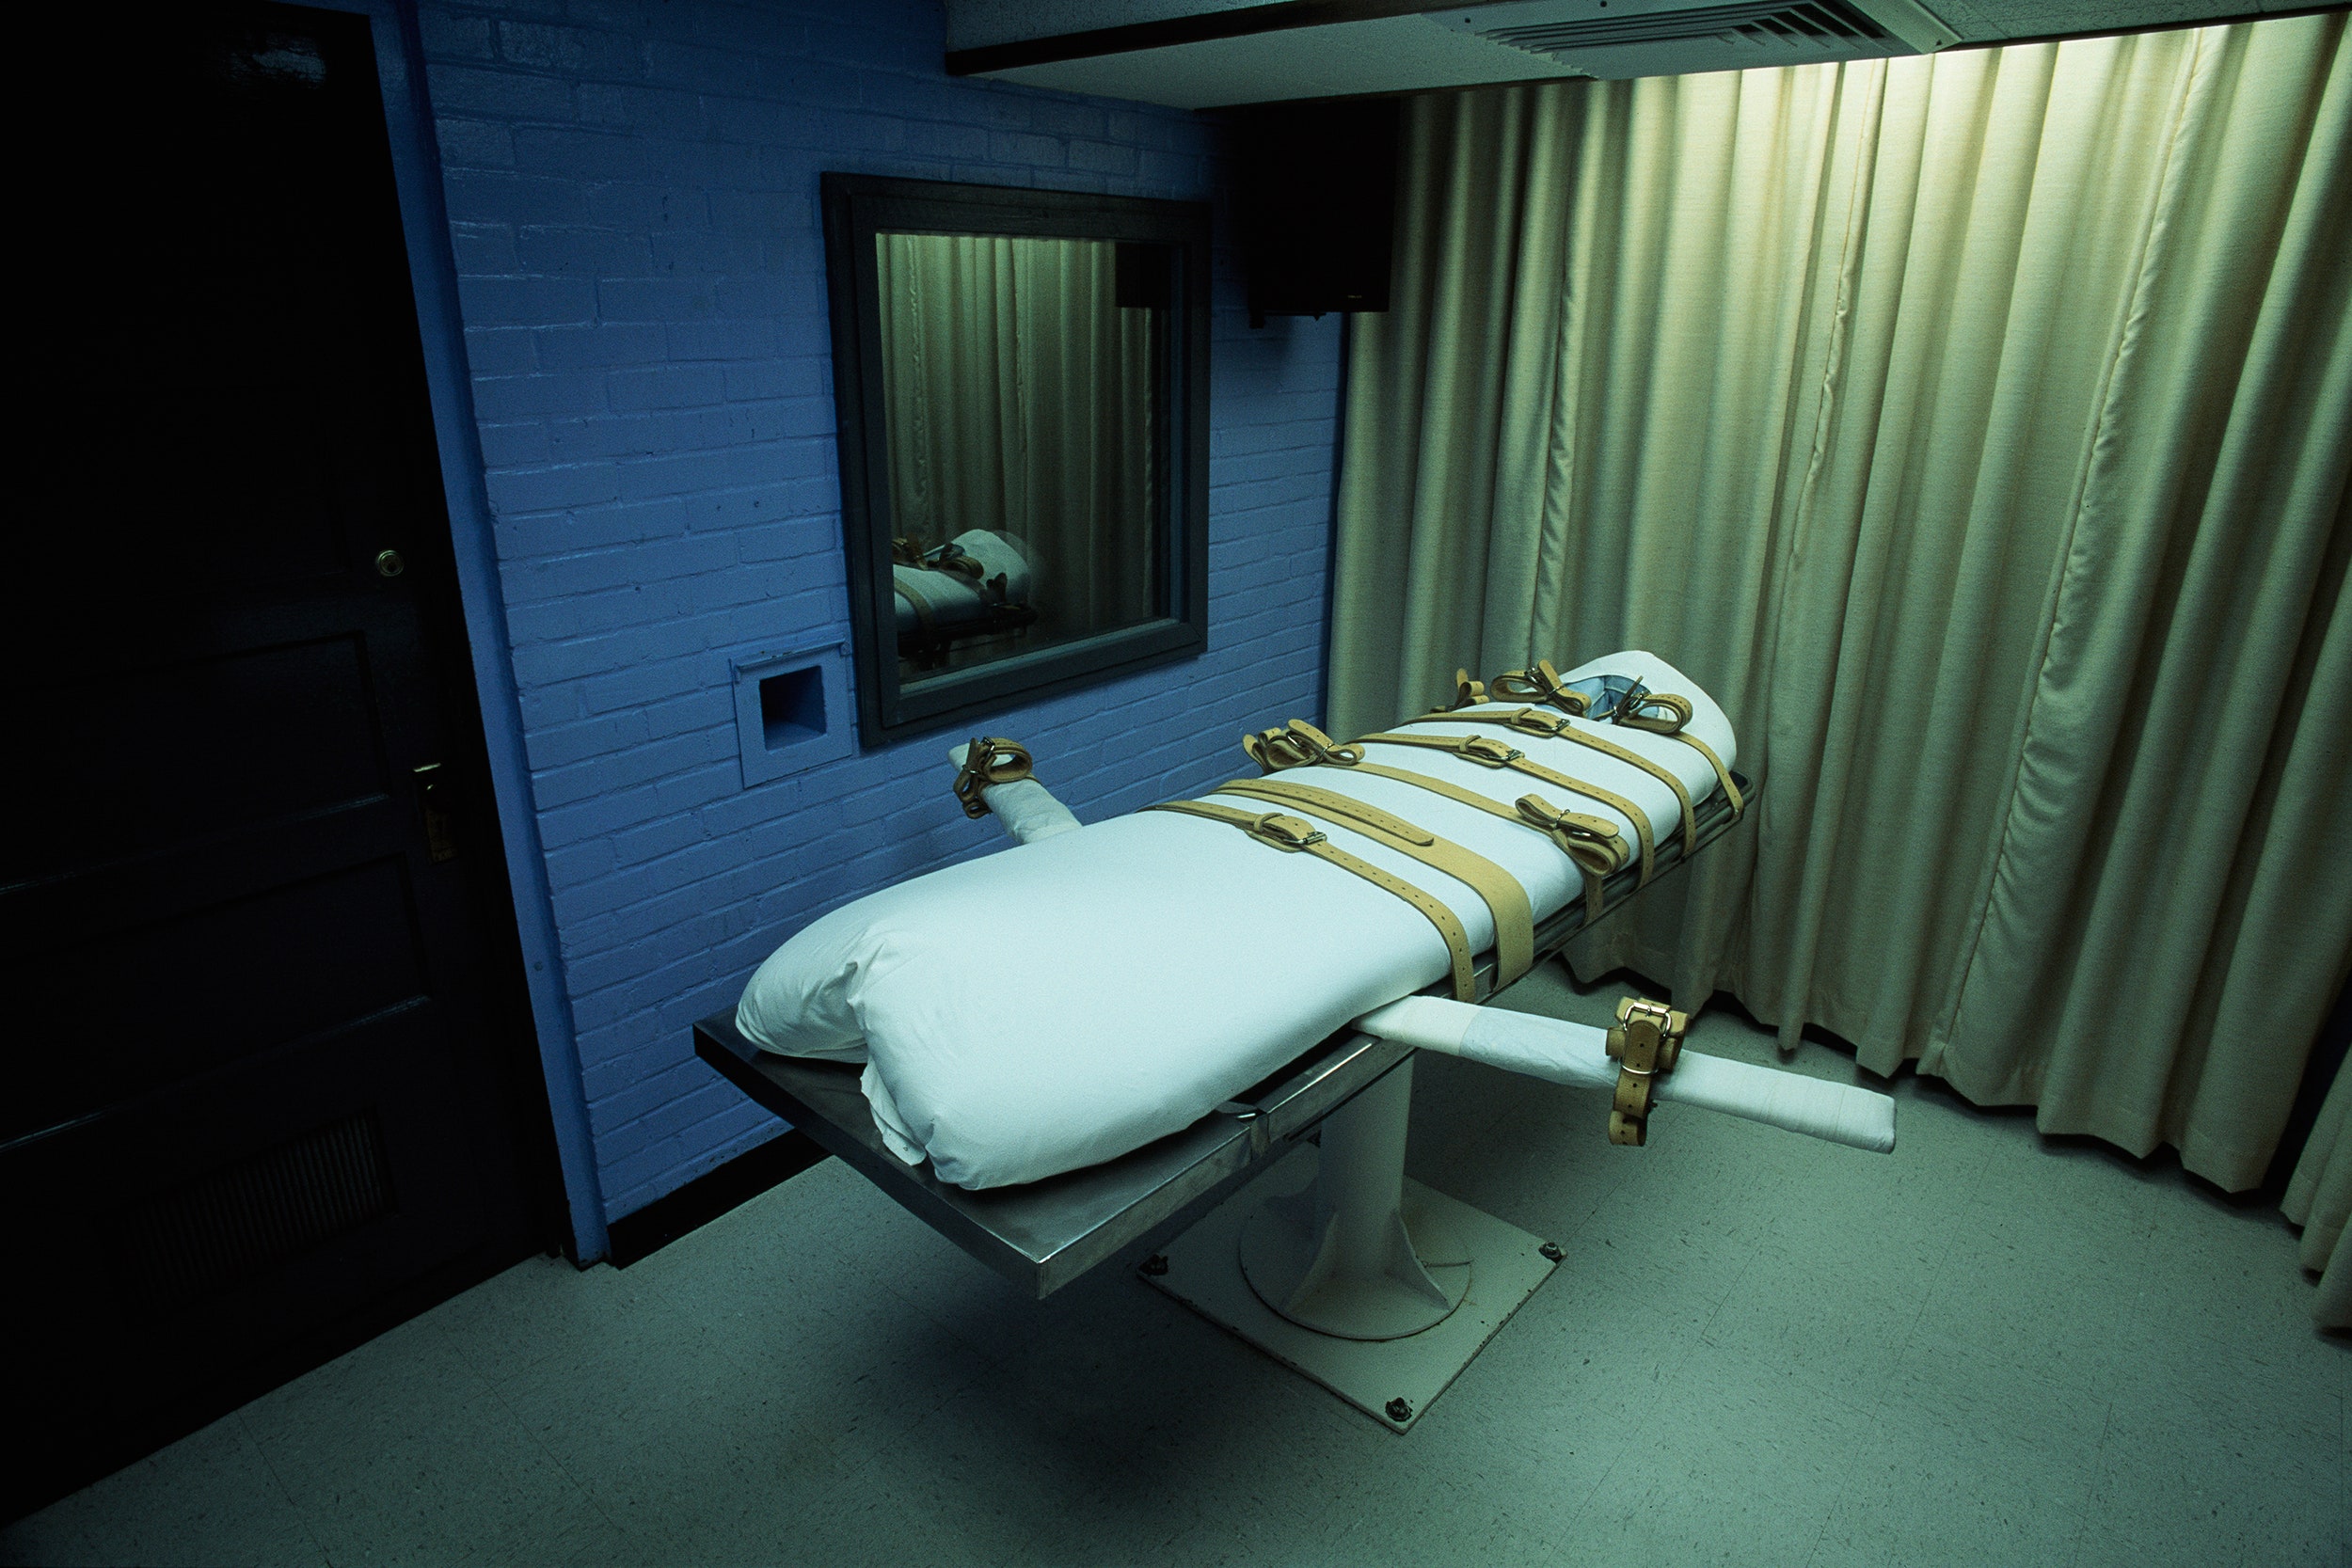 carl goforth recommends slow hanging execution videos pic